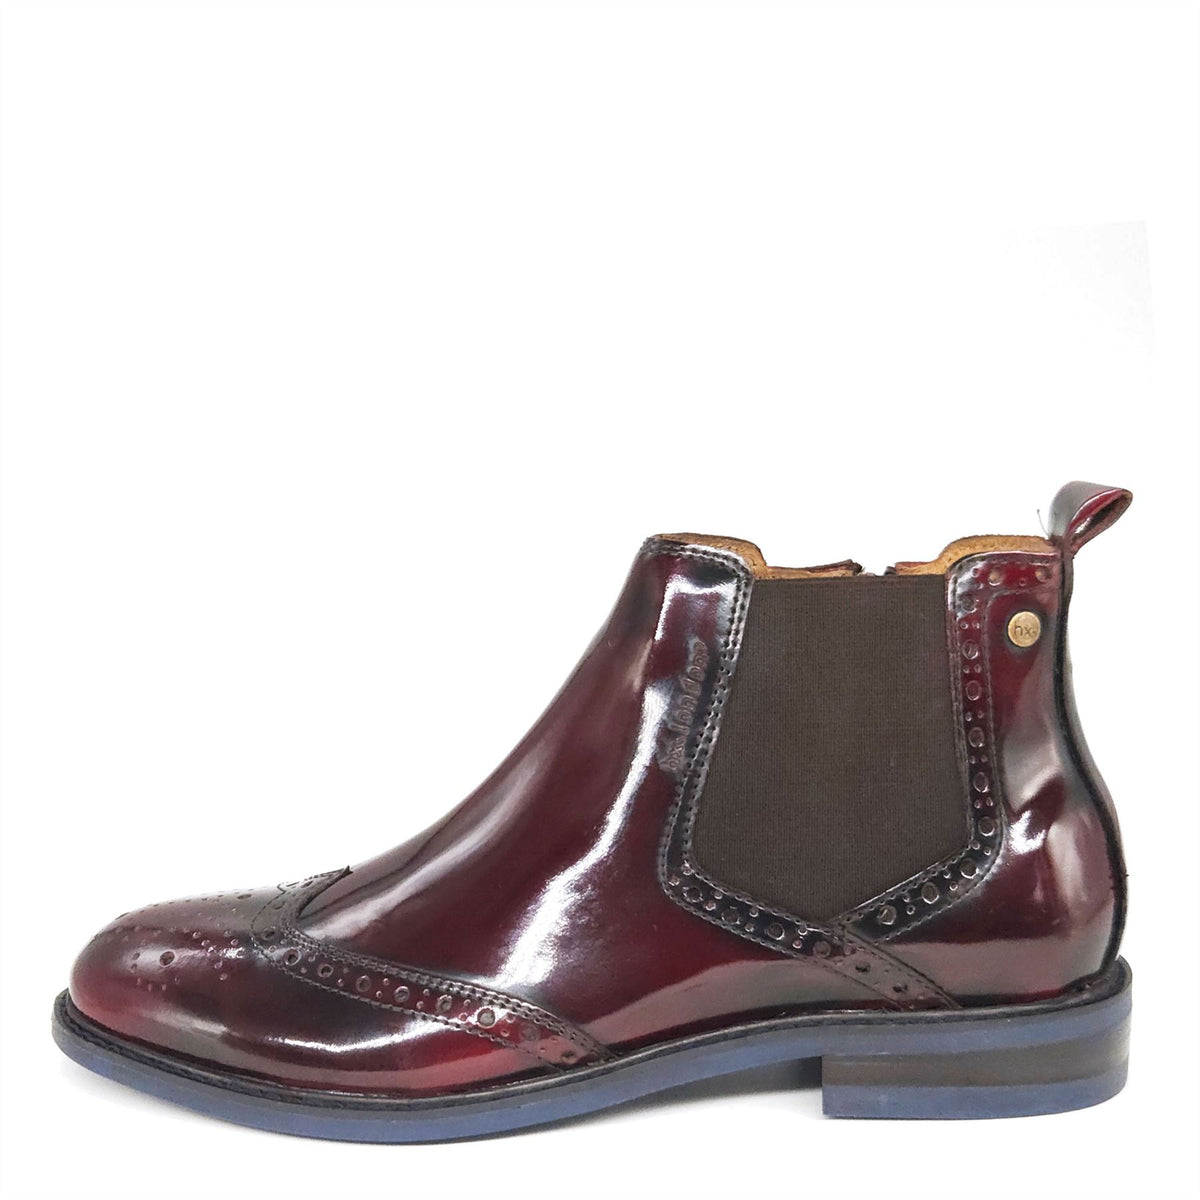 HX London Erith Brogue Chelsea Leather Boots